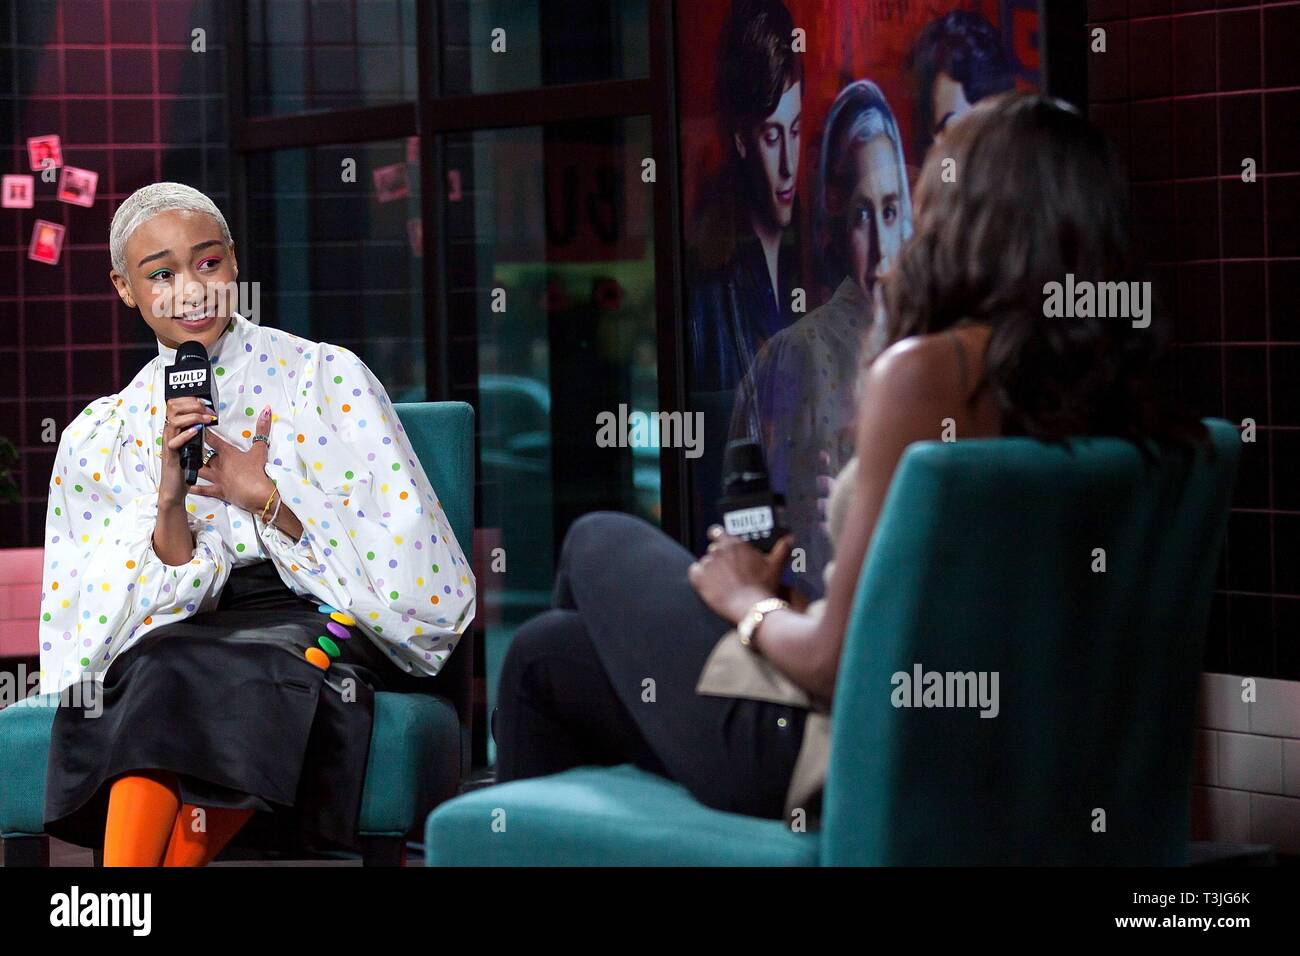 New York, NY, USA. 9th Apr, 2019. Tati Gabrielle inside for AOL Build Series Celebrity Candids - TUE, AOL Build Series, New York, NY April 9, 2019. Credit: Steve Mack/Everett Collection/Alamy Live News Stock Photo